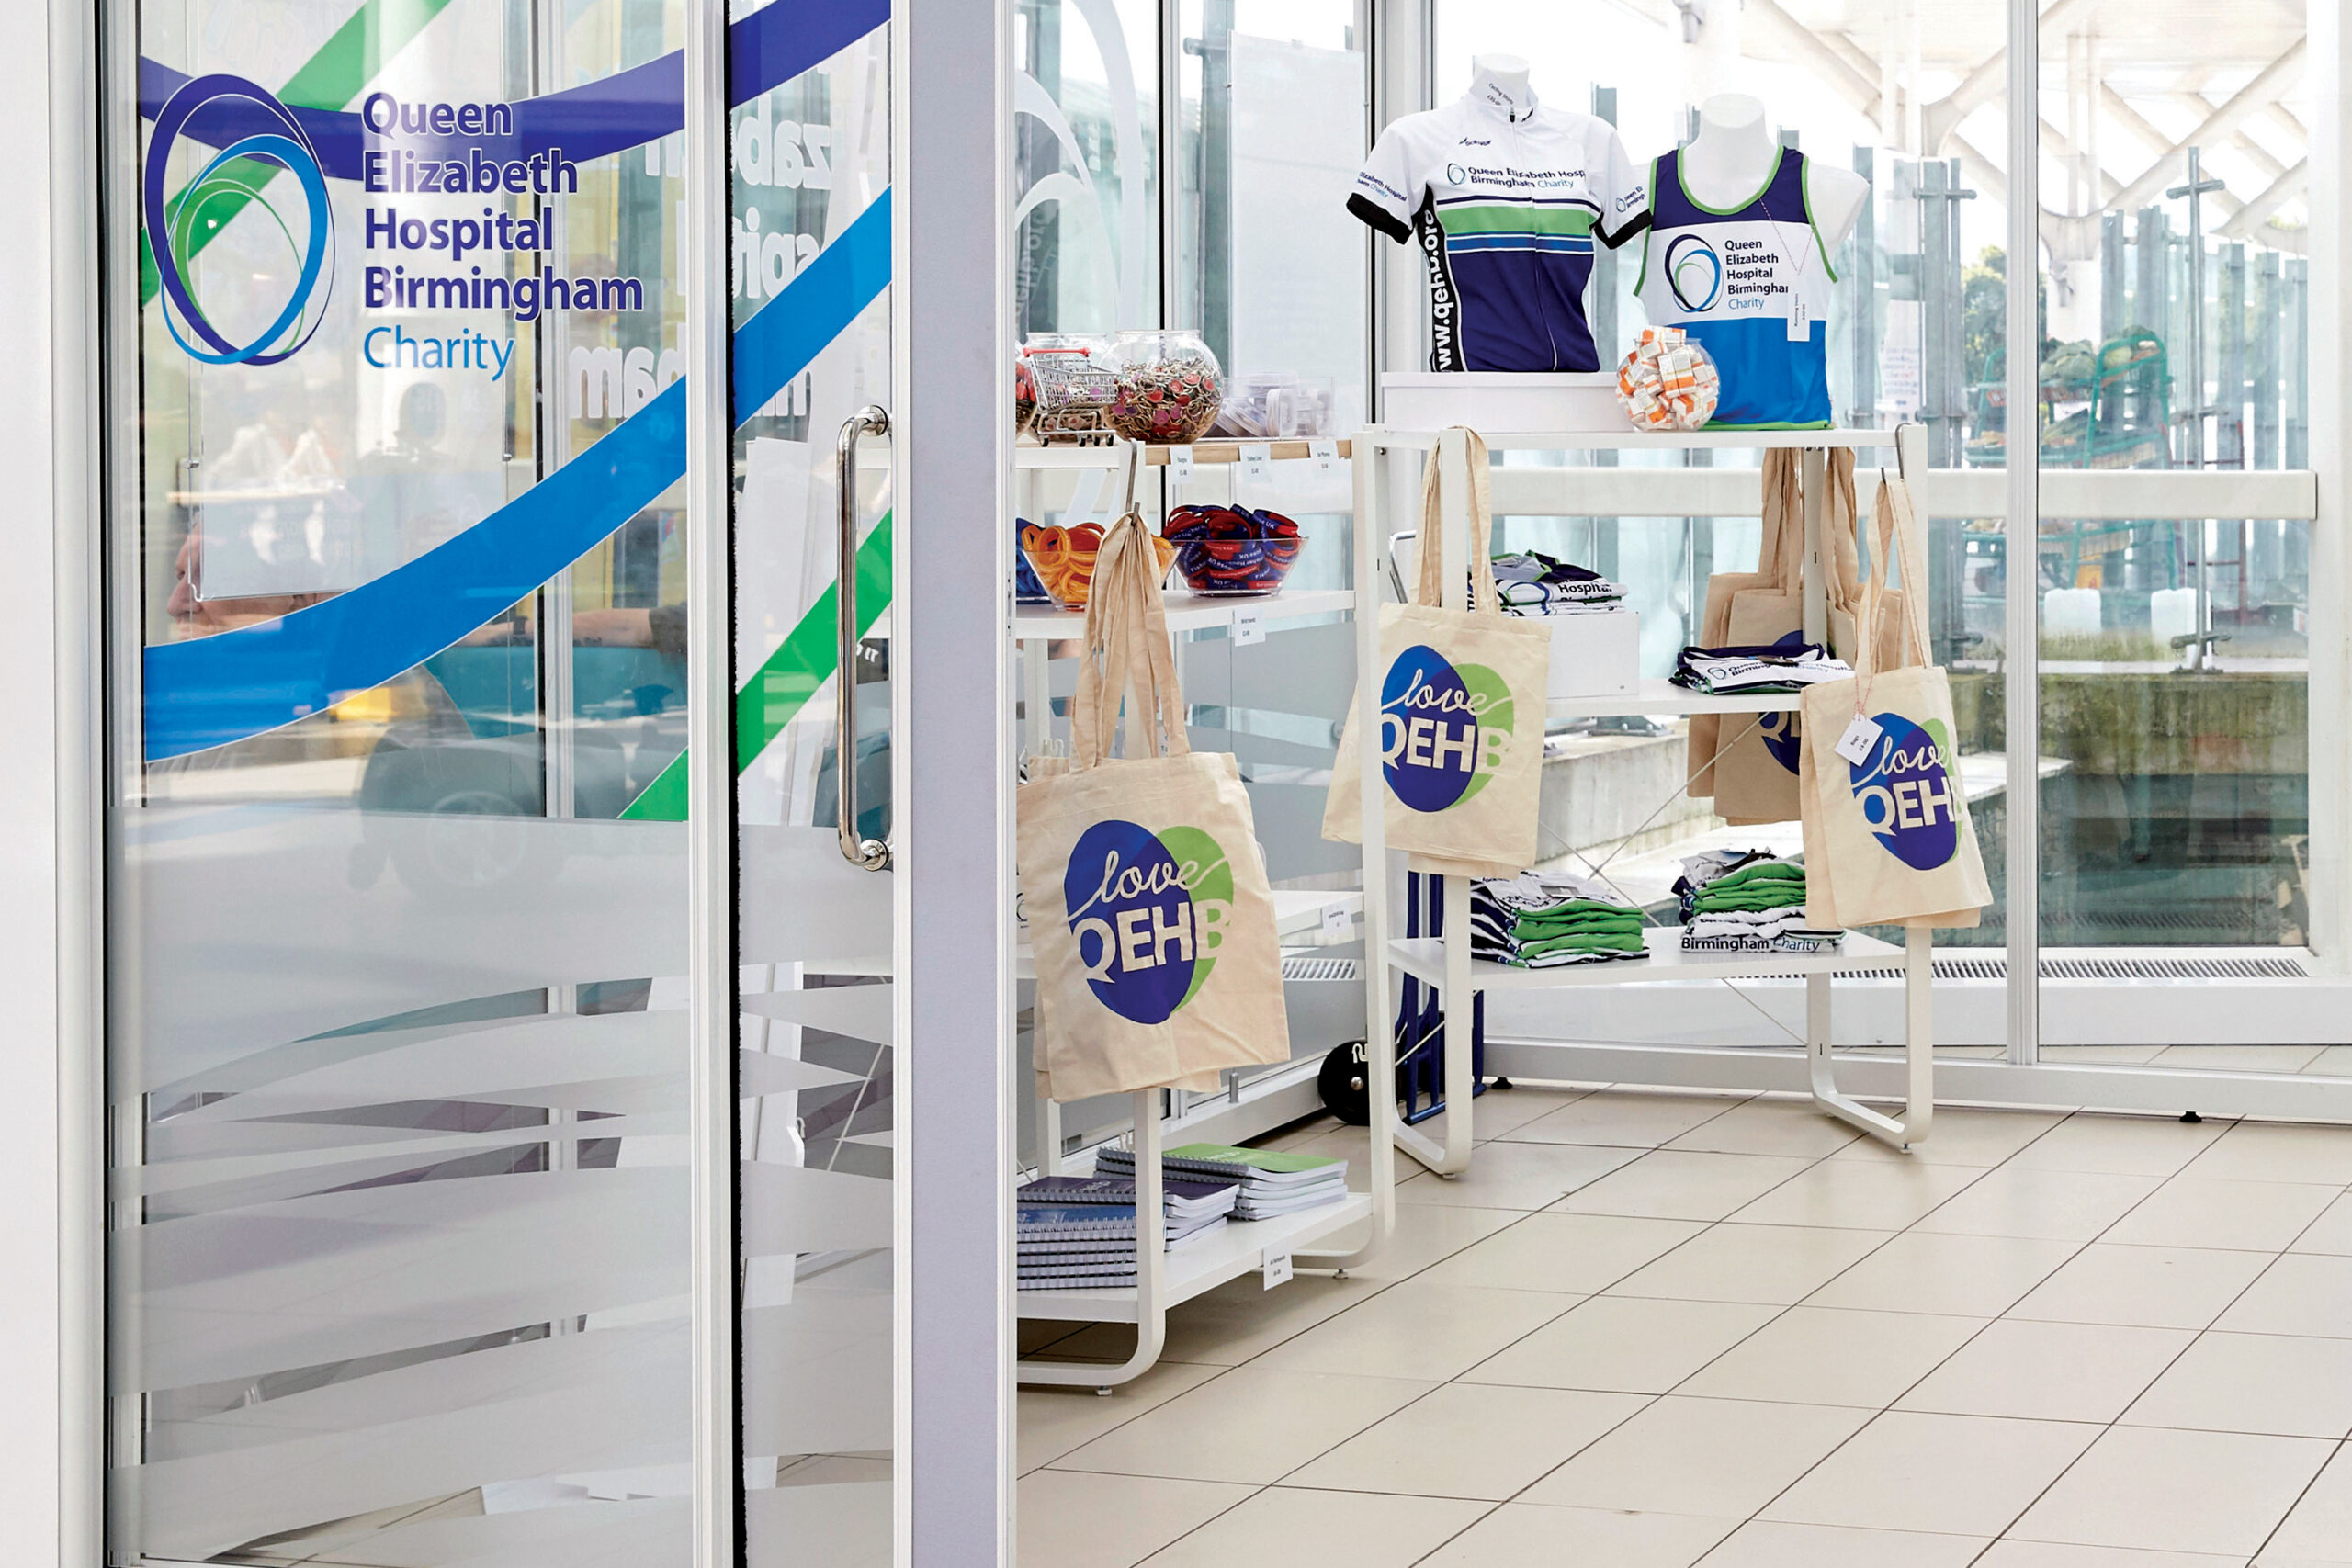 Image of the QEHB Charity retail kiosk in the foyer the Queen Elizabeth Hospital Birmingham. Inside the glass-walled shop are shelves containing QEHB branded clothing, stationery and accessories.